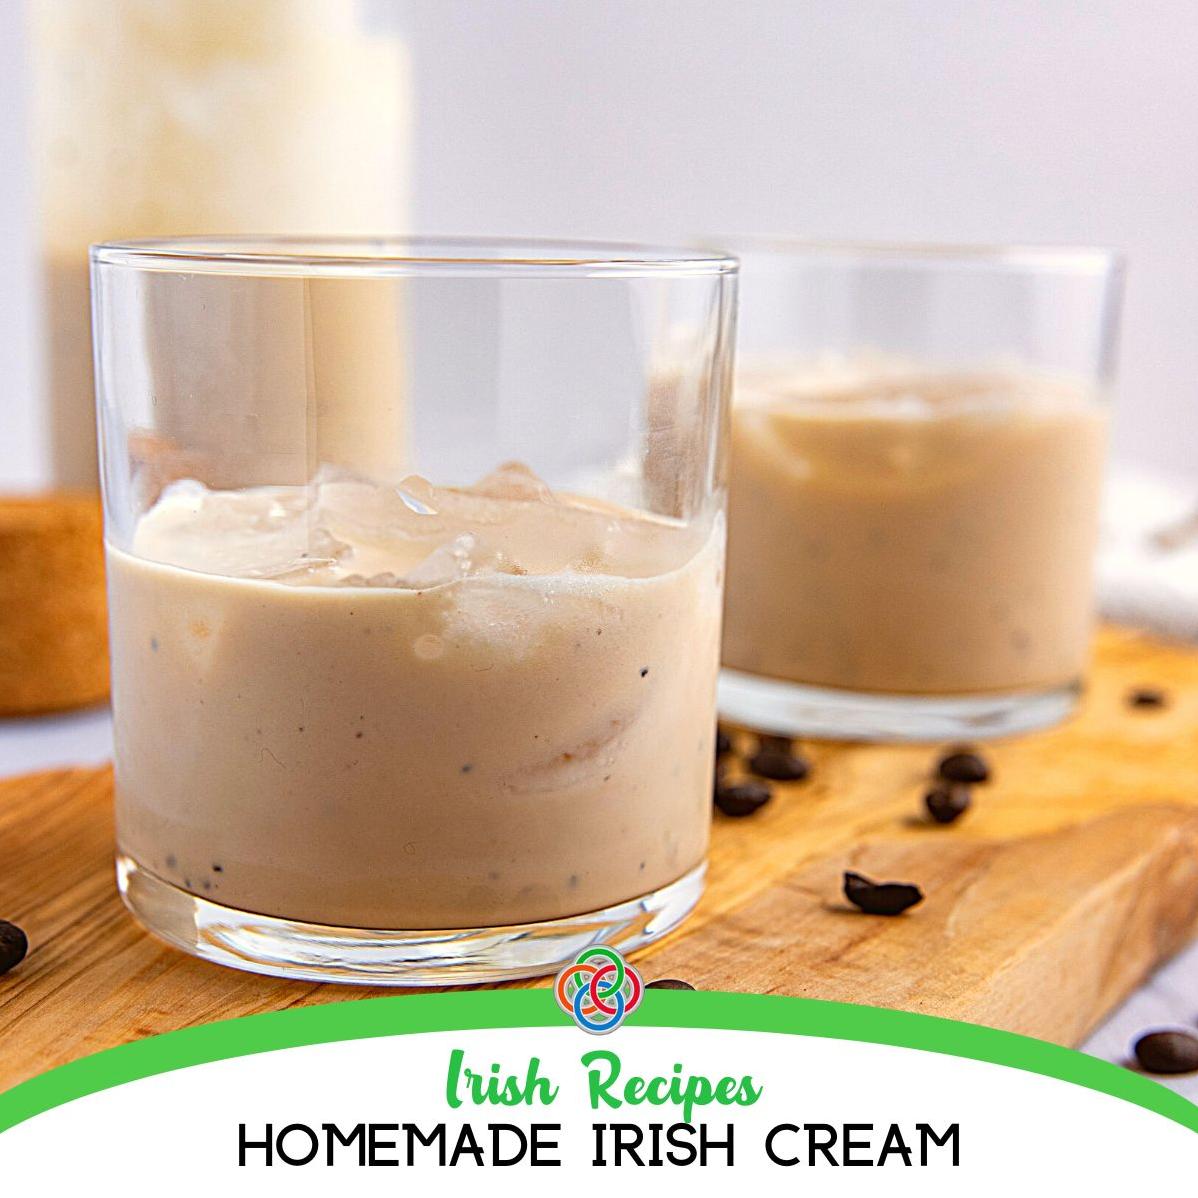  This homemade Irish cream is sure to impress your guests and loved ones